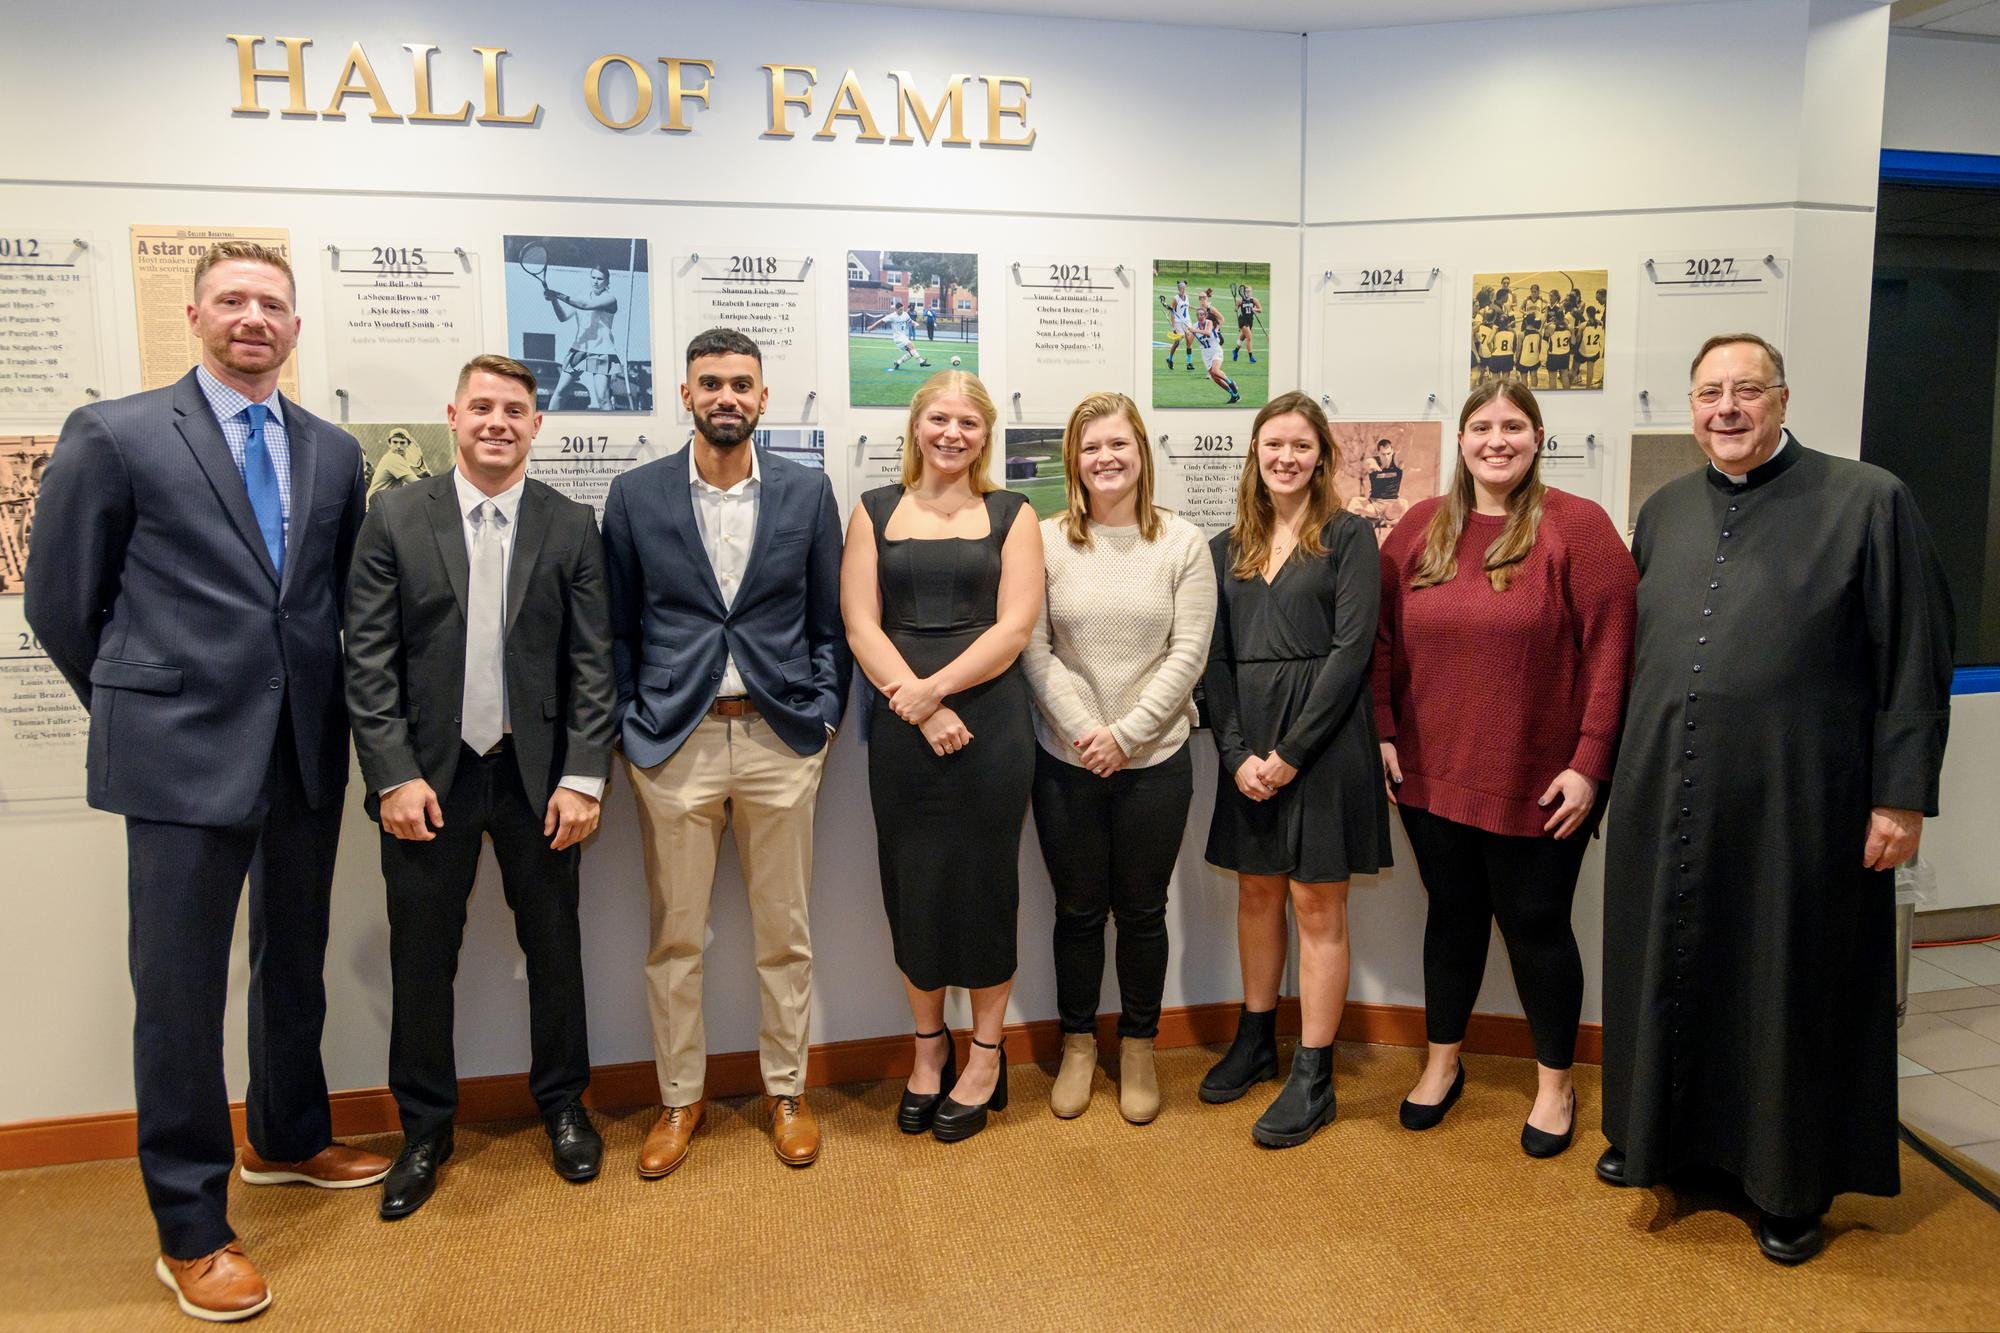   Left to right, Trevor Purcell, Head Baseball Coach; Dylan DeMeo ’18; Matt Garcia ’15; Bridget McKeever ’18; Claire Duffy ’16; Shannon Sommer ’17; Cindy Connoly ’18; and Fr. Gregoire Fluet, Interim President of Mount Saint Mary College.  